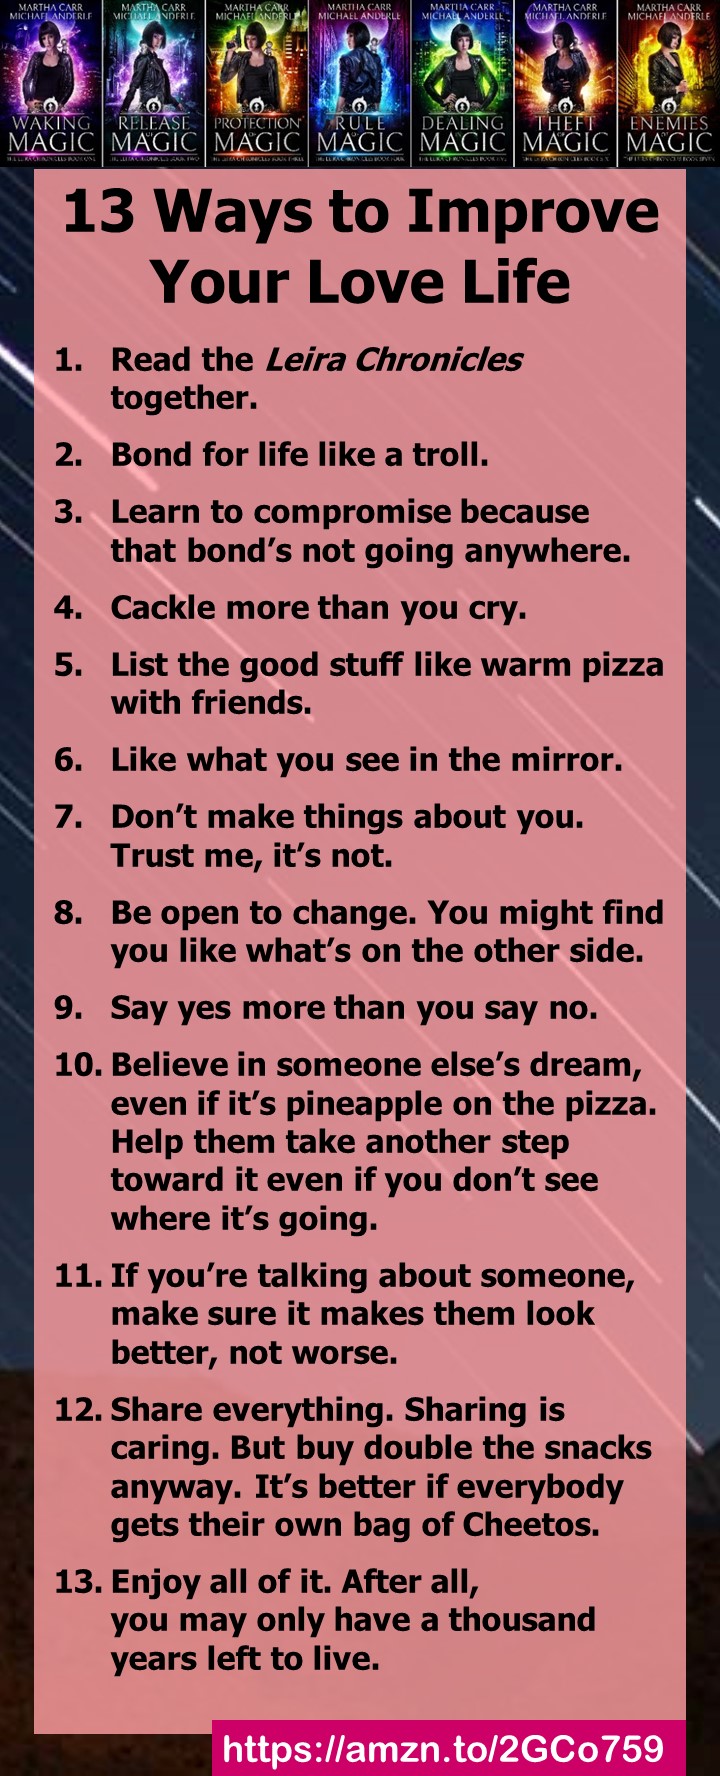 These 13 Ways to Improve Your Love Life are excerpted from an email I received from Martha Carr, co-author of The Leira Chronicles magical realism series. If you love magical realism, check out The Leira Chronicles.